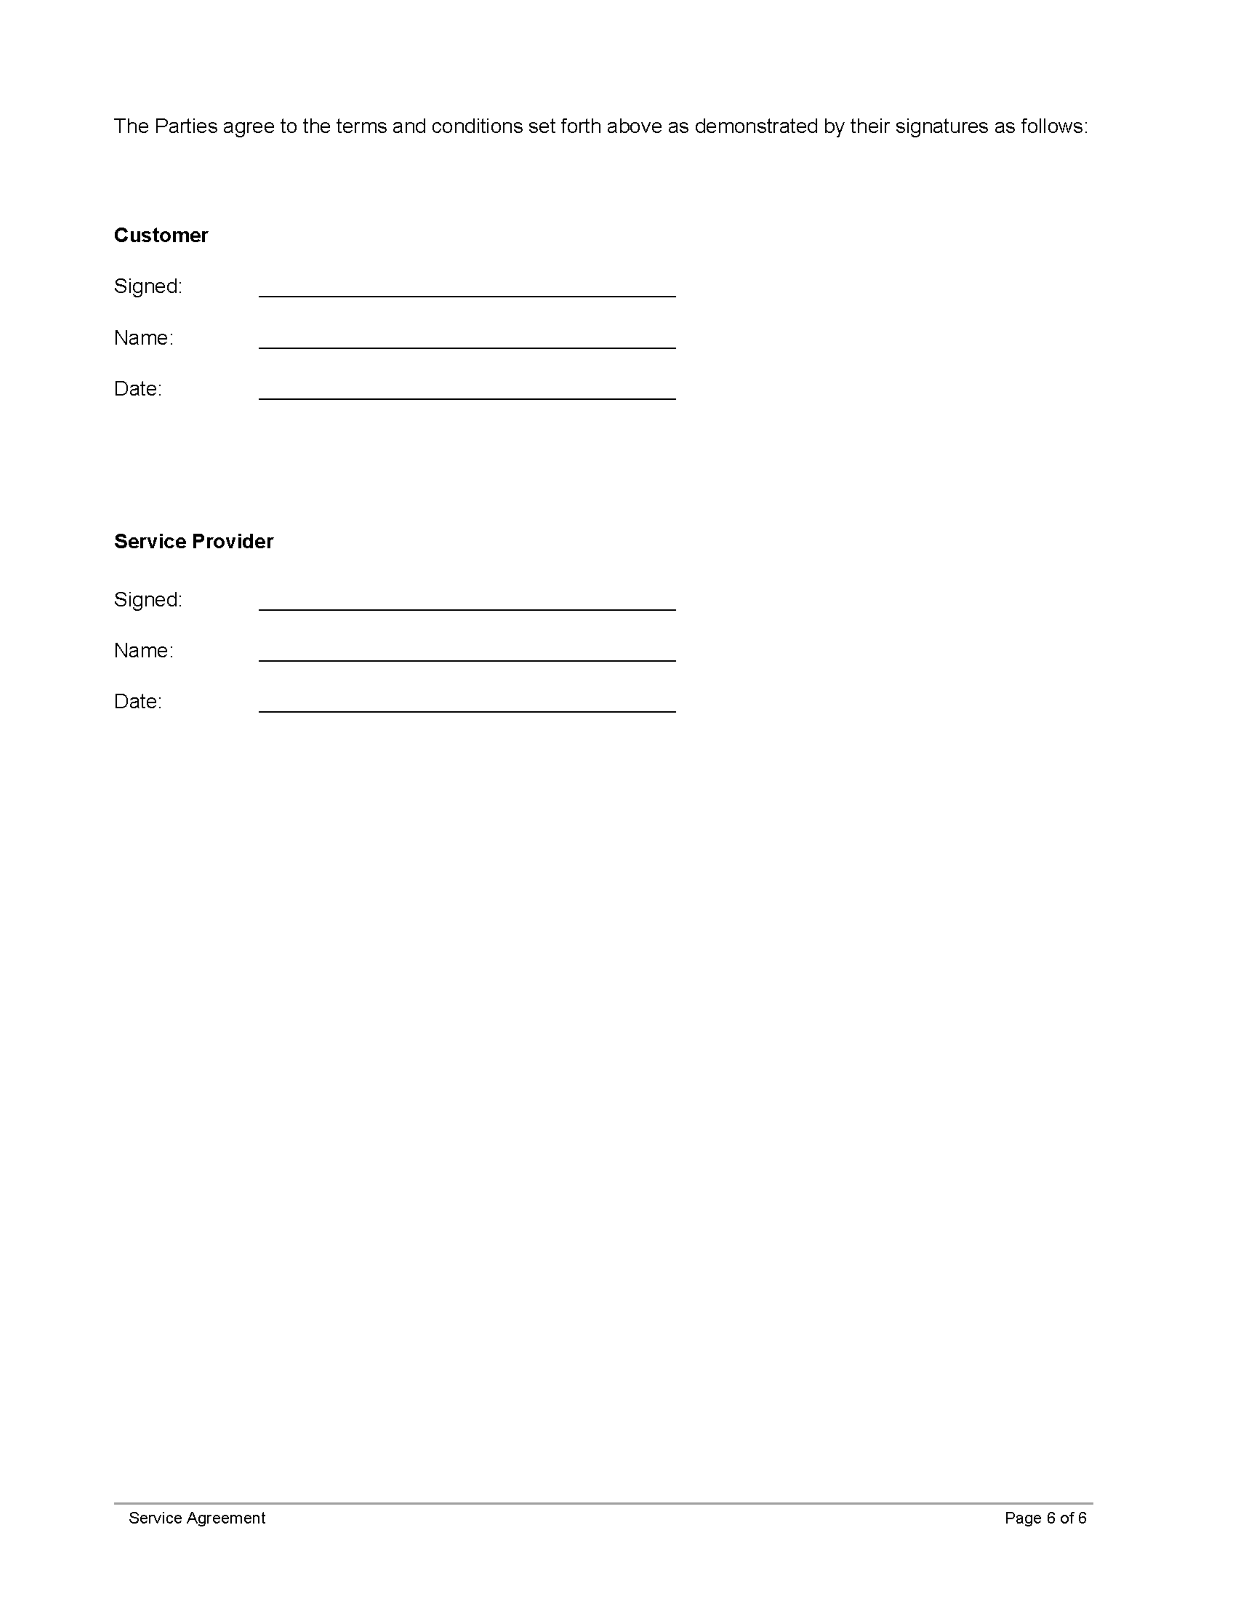 service_contract_template_Page_5